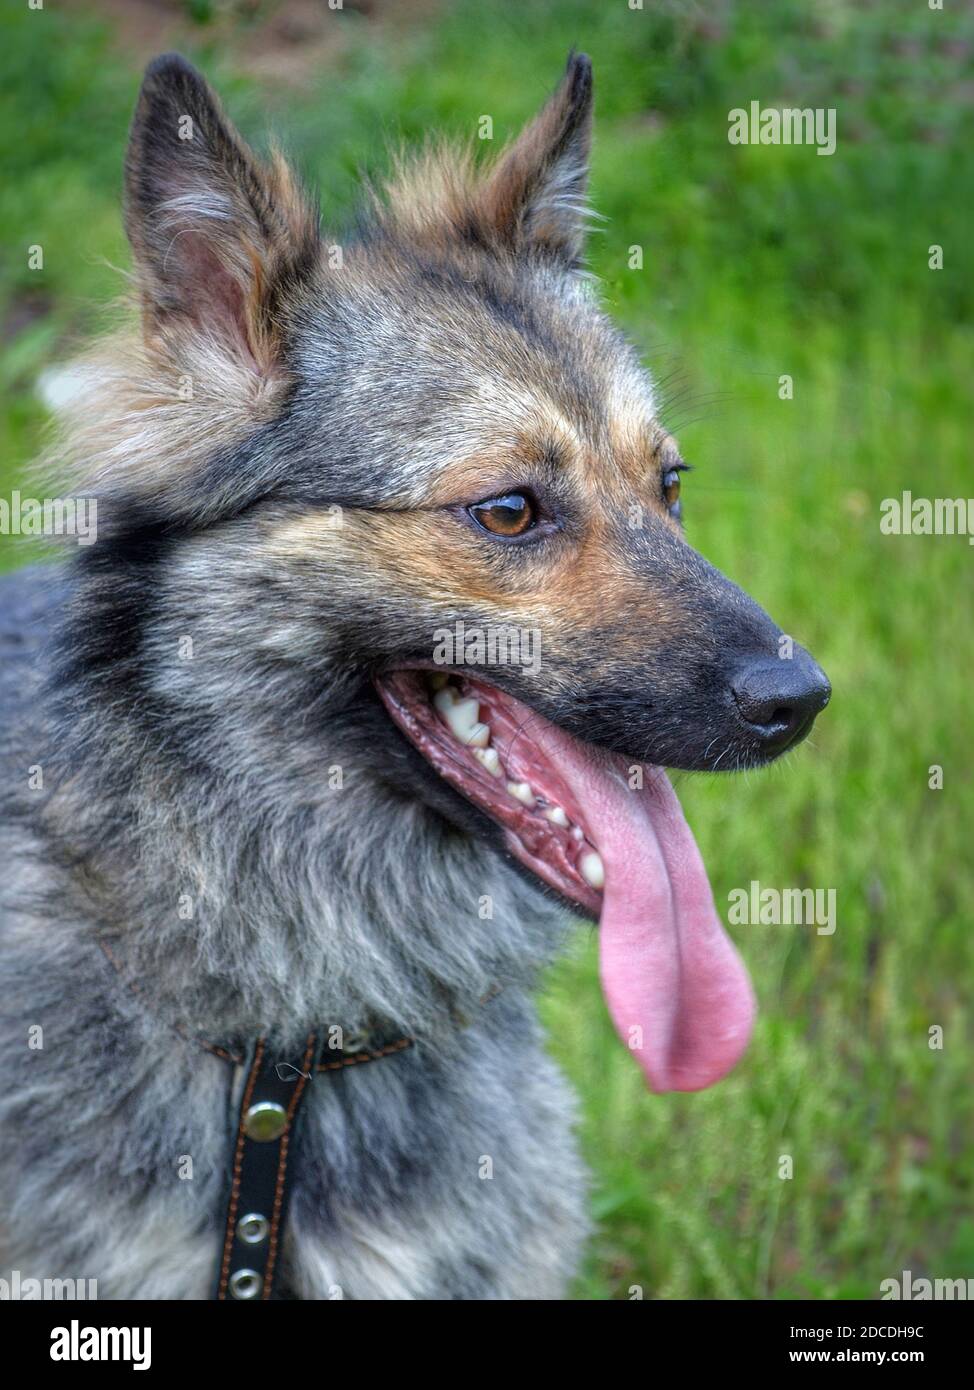 Profile portrait of a fluffy brown dog.  Stock Photo